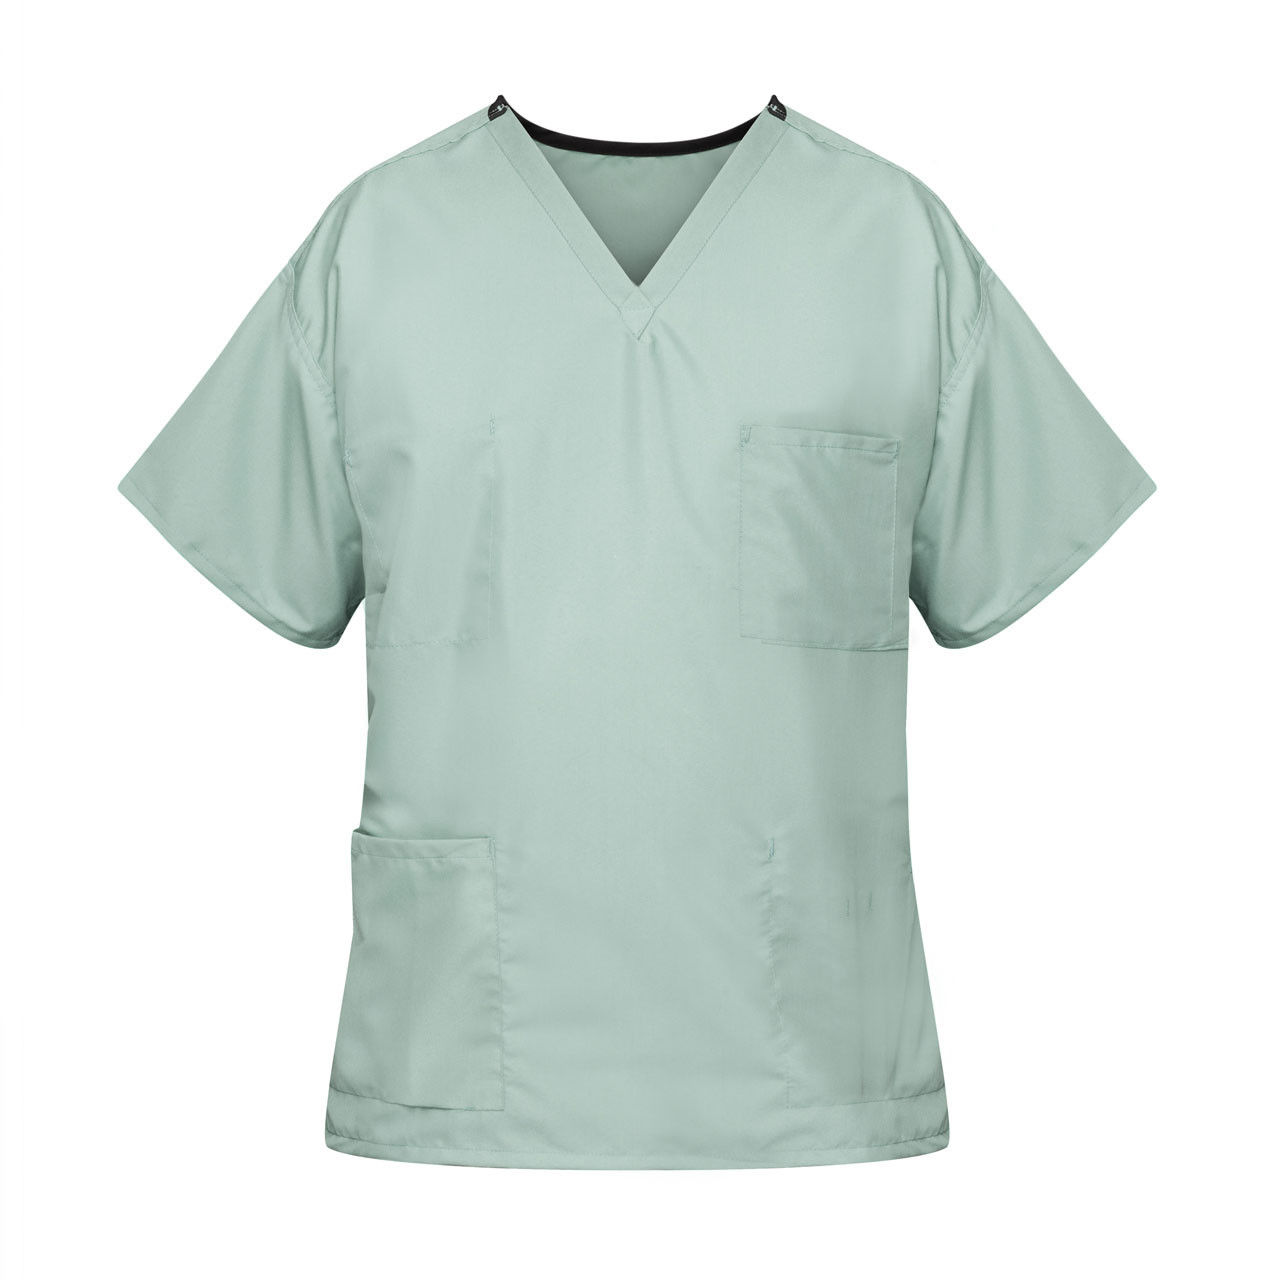 What sizes are available for the misty green scrubs?